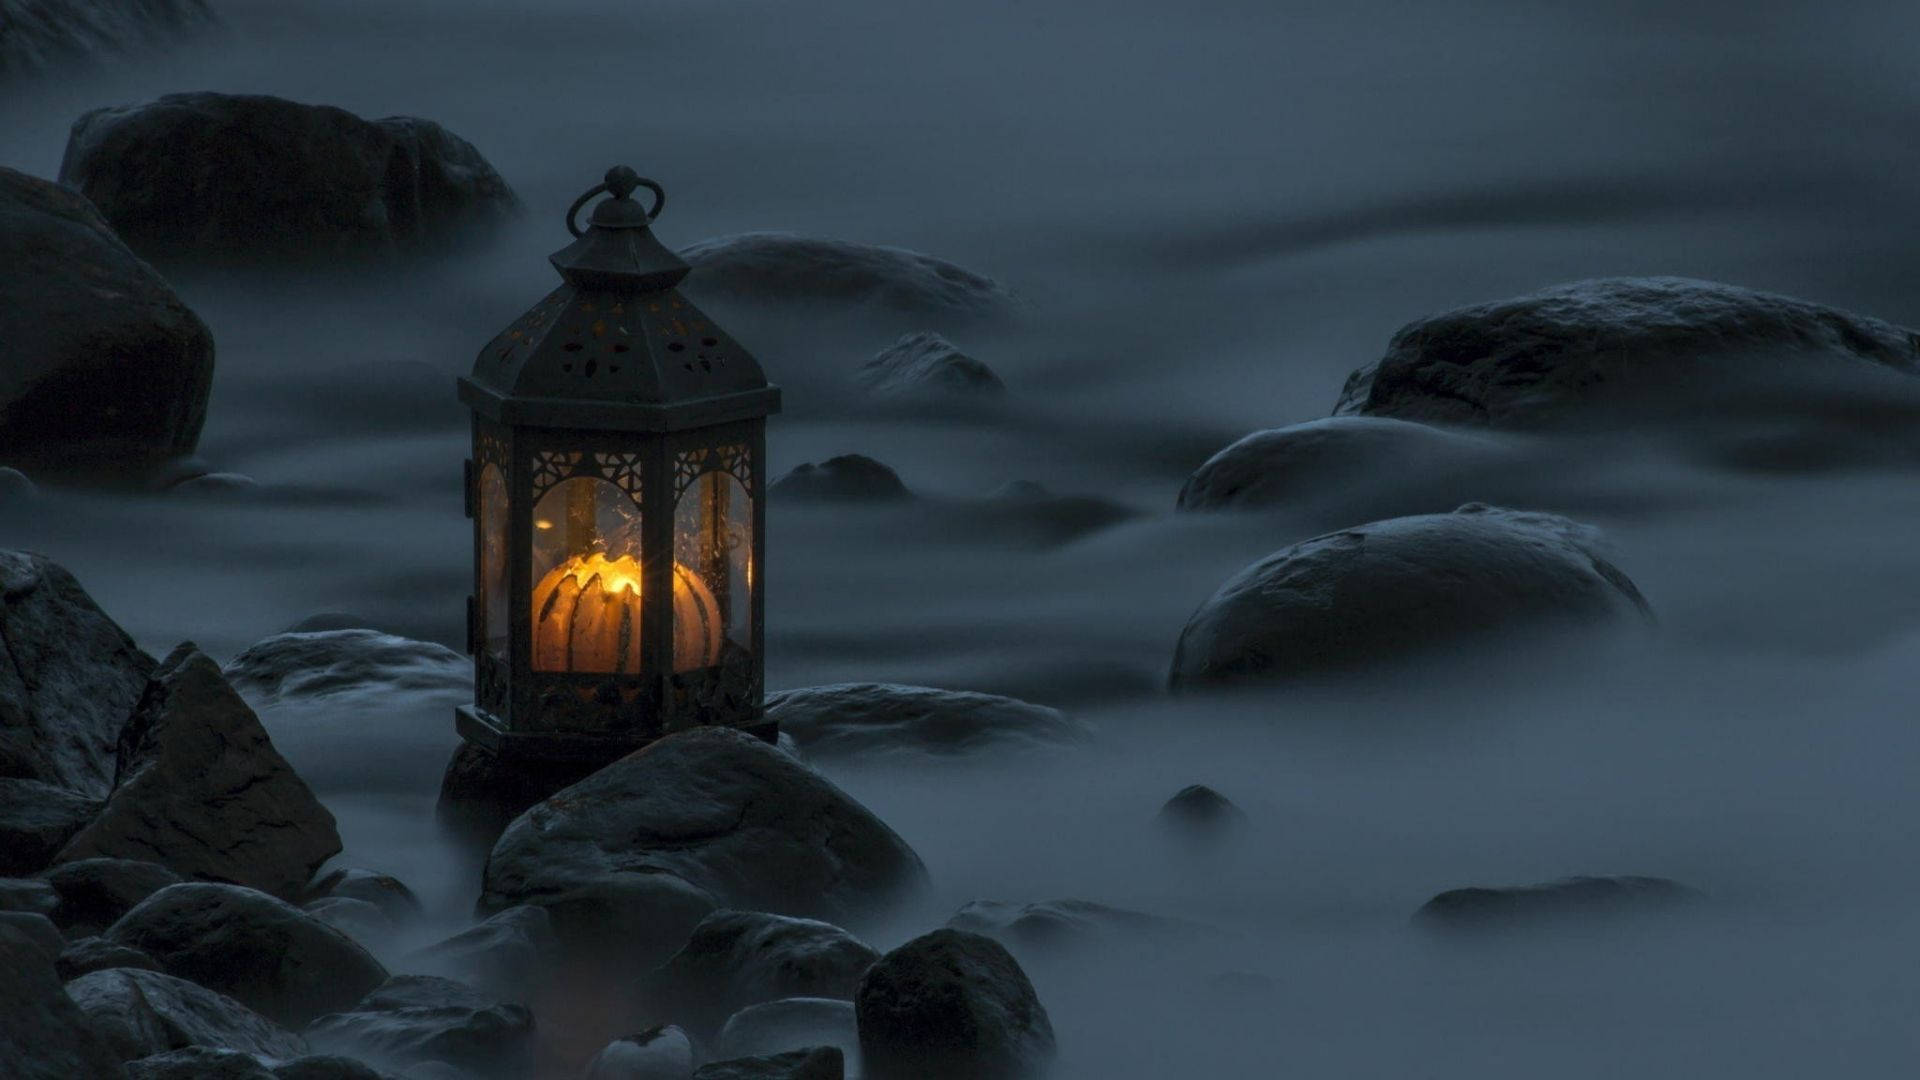 Candle Lamp By The Sea Wallpaper